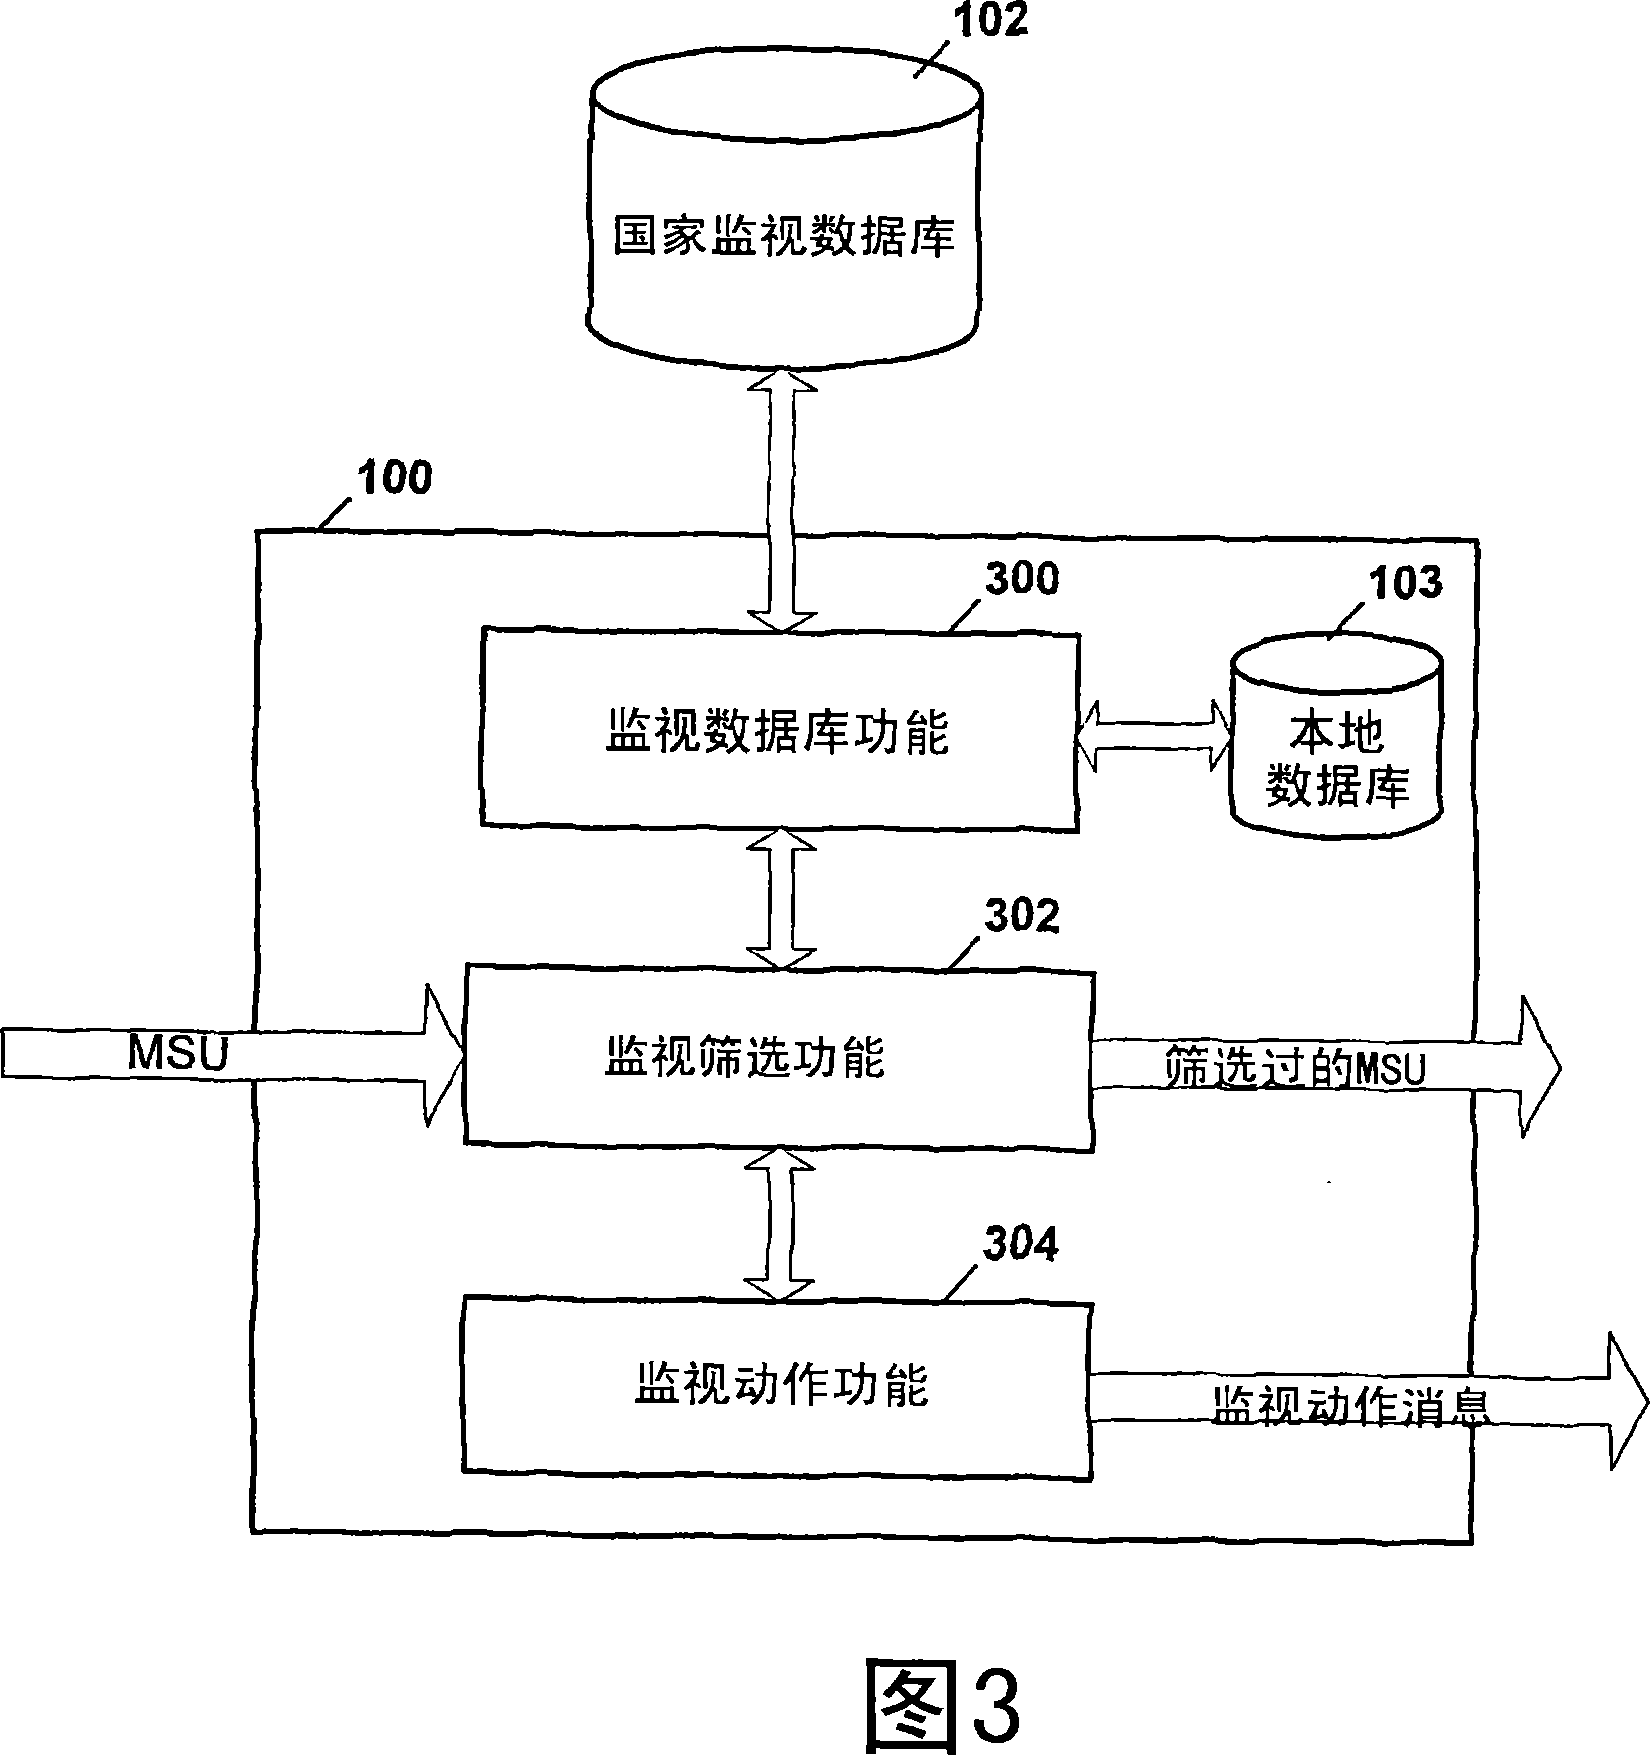 Methods, systems, and computer program products for surveillance monitoring in a communication network based on a national surveillance database